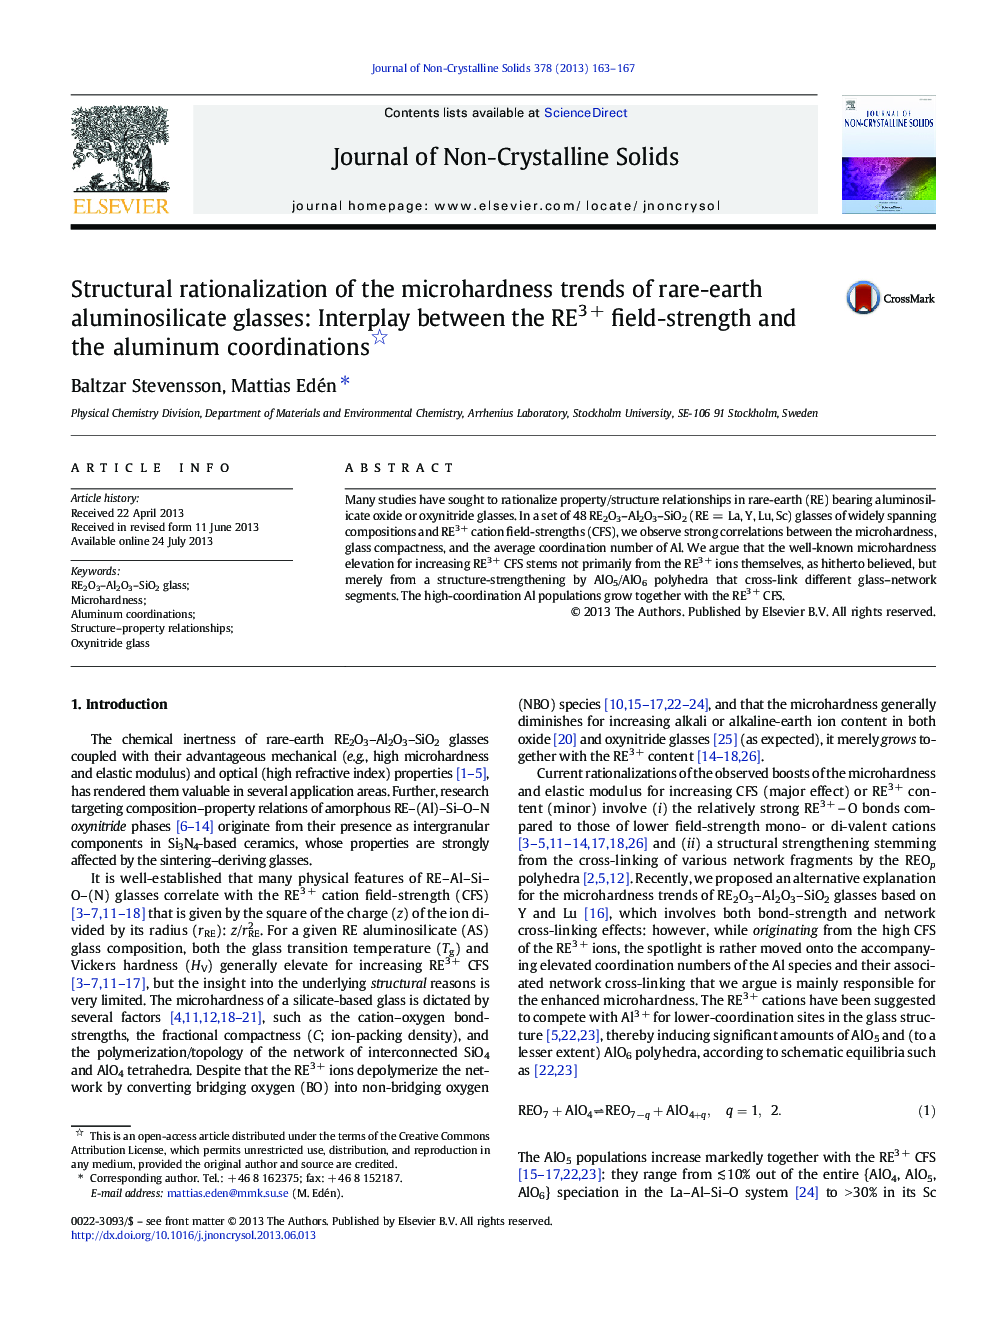 Structural rationalization of the microhardness trends of rare-earth aluminosilicate glasses: Interplay between the RE3Â + field-strength and the aluminum coordinations